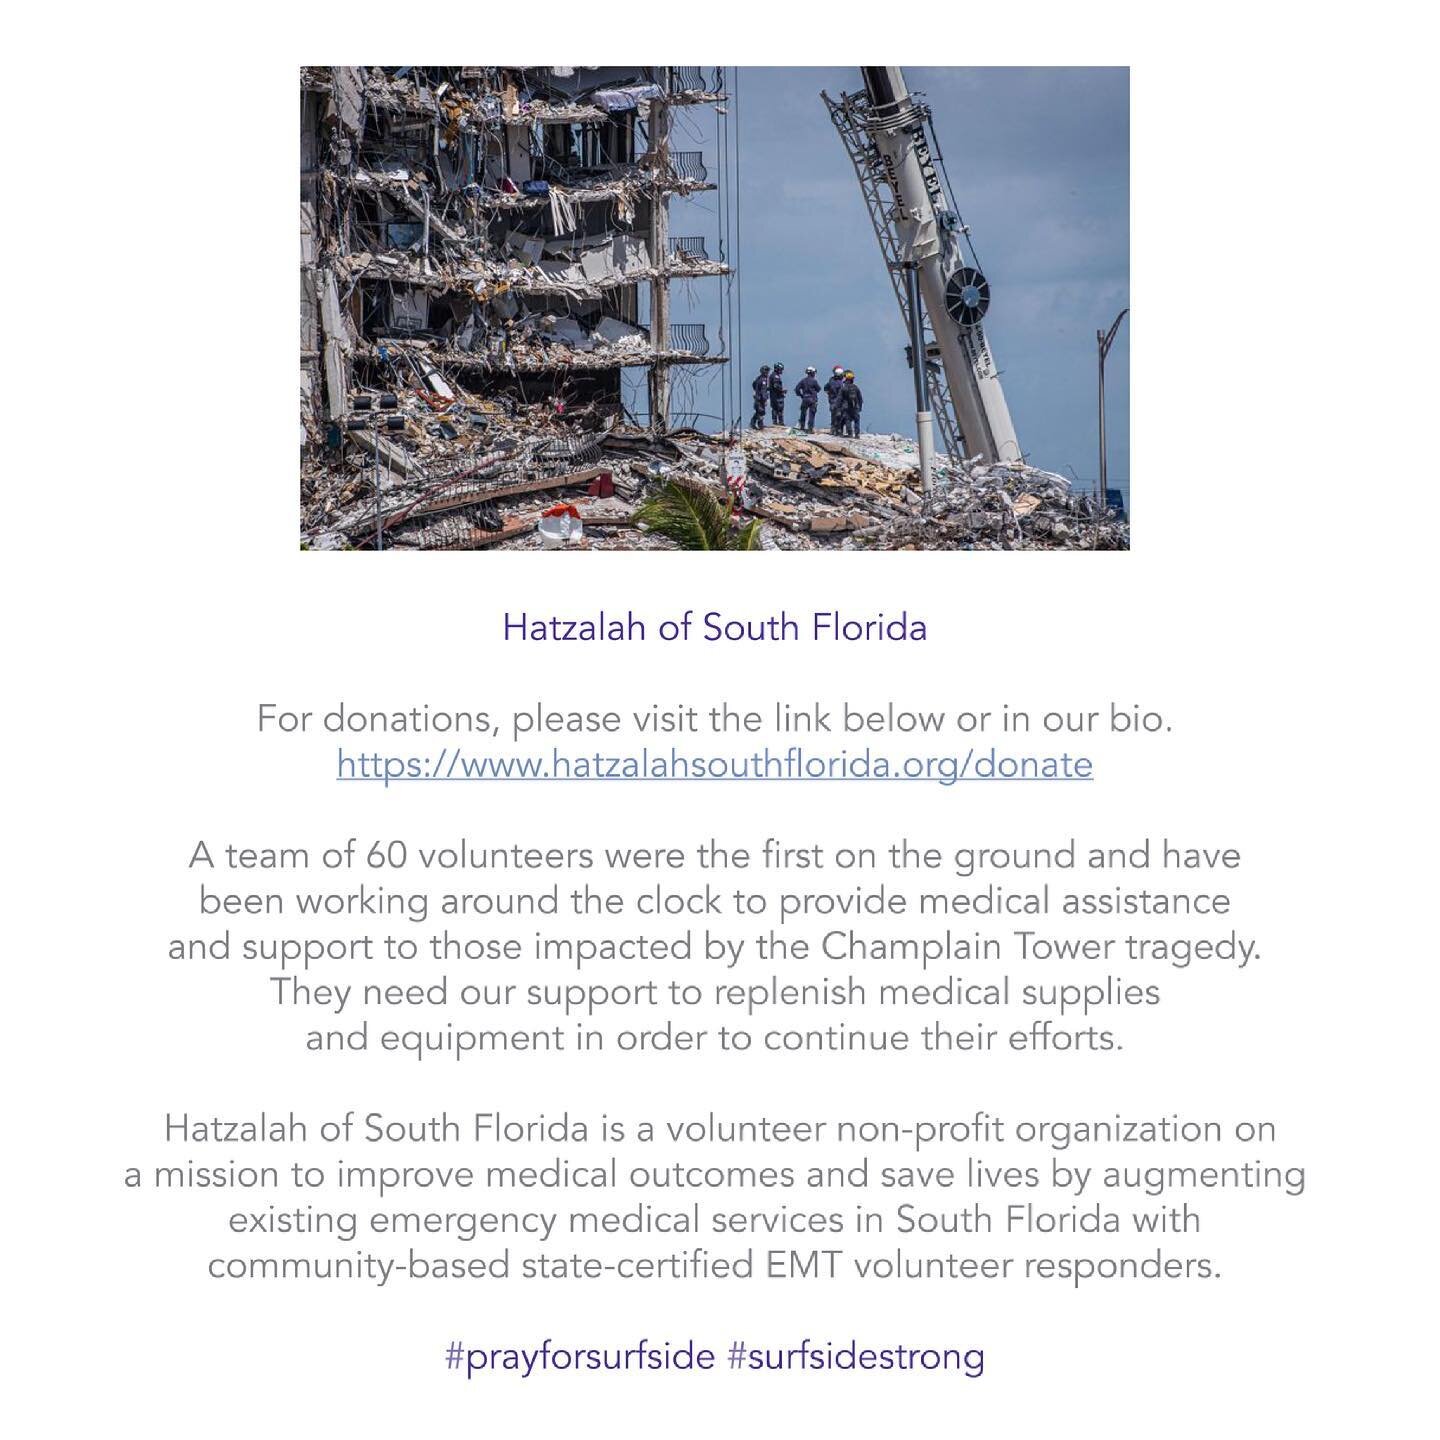 A team of 60 @hatzalahsouthflorida  volunteers were the first on the ground and have been working around the clock to provide medical assistance to those impacted by the Champlain Tower tragedy. They need our help!

Visit the link in our bio to suppo